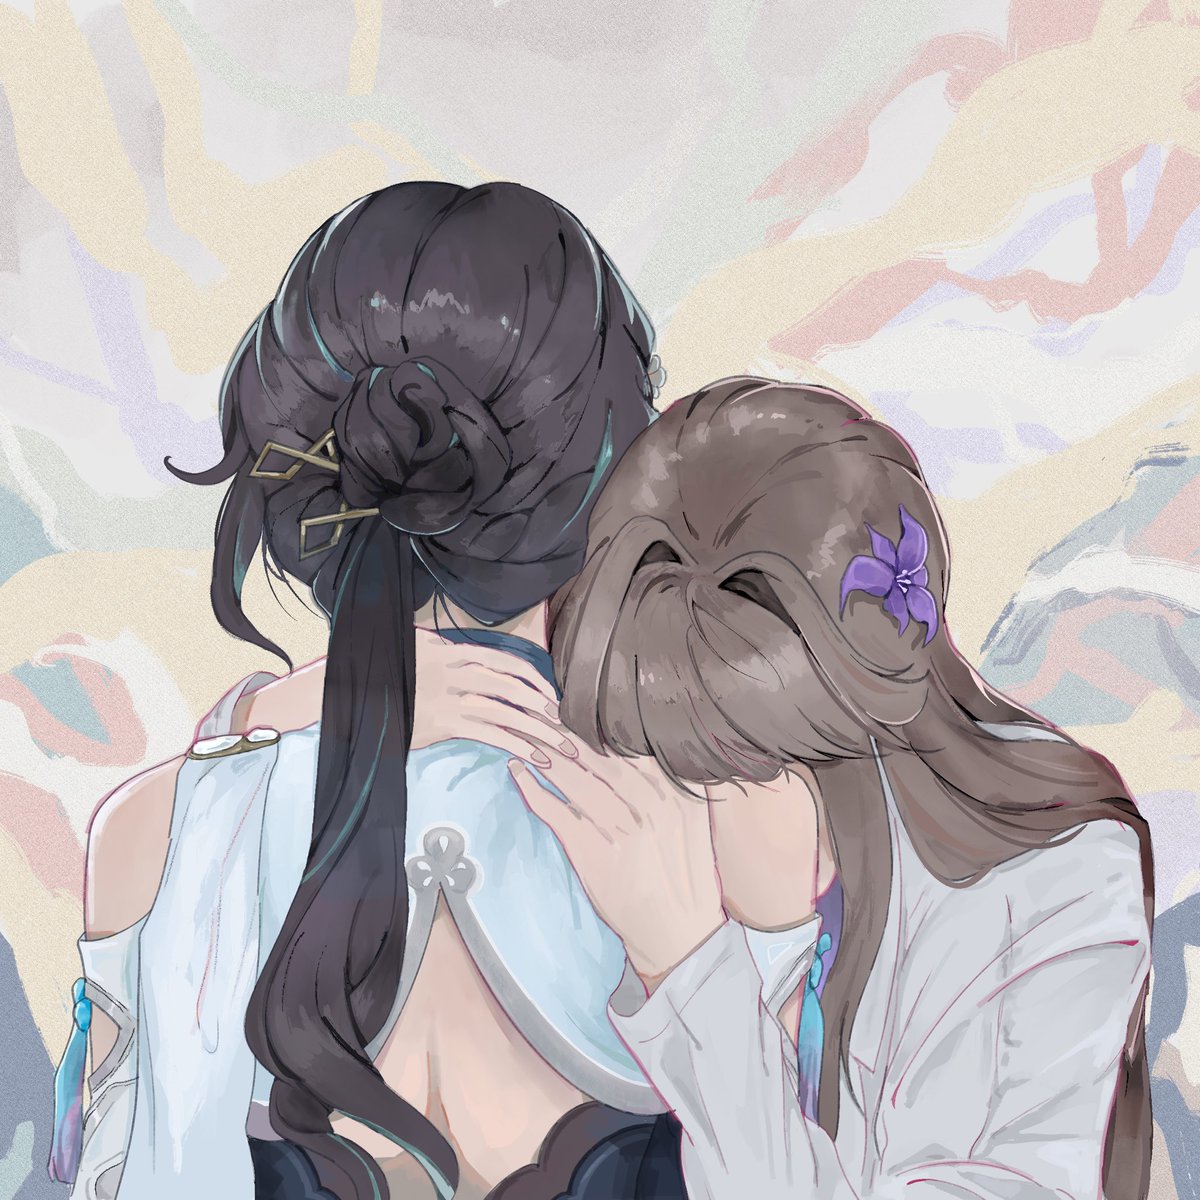 #ruanherta #hertamei #เหมยธ่า #ธ่าเหมย (ft human form Herta)

🌸💎 🛰️🧬

“It was the moment Herta realized that the warmth of physical contact is worthy than planets and beyond.”